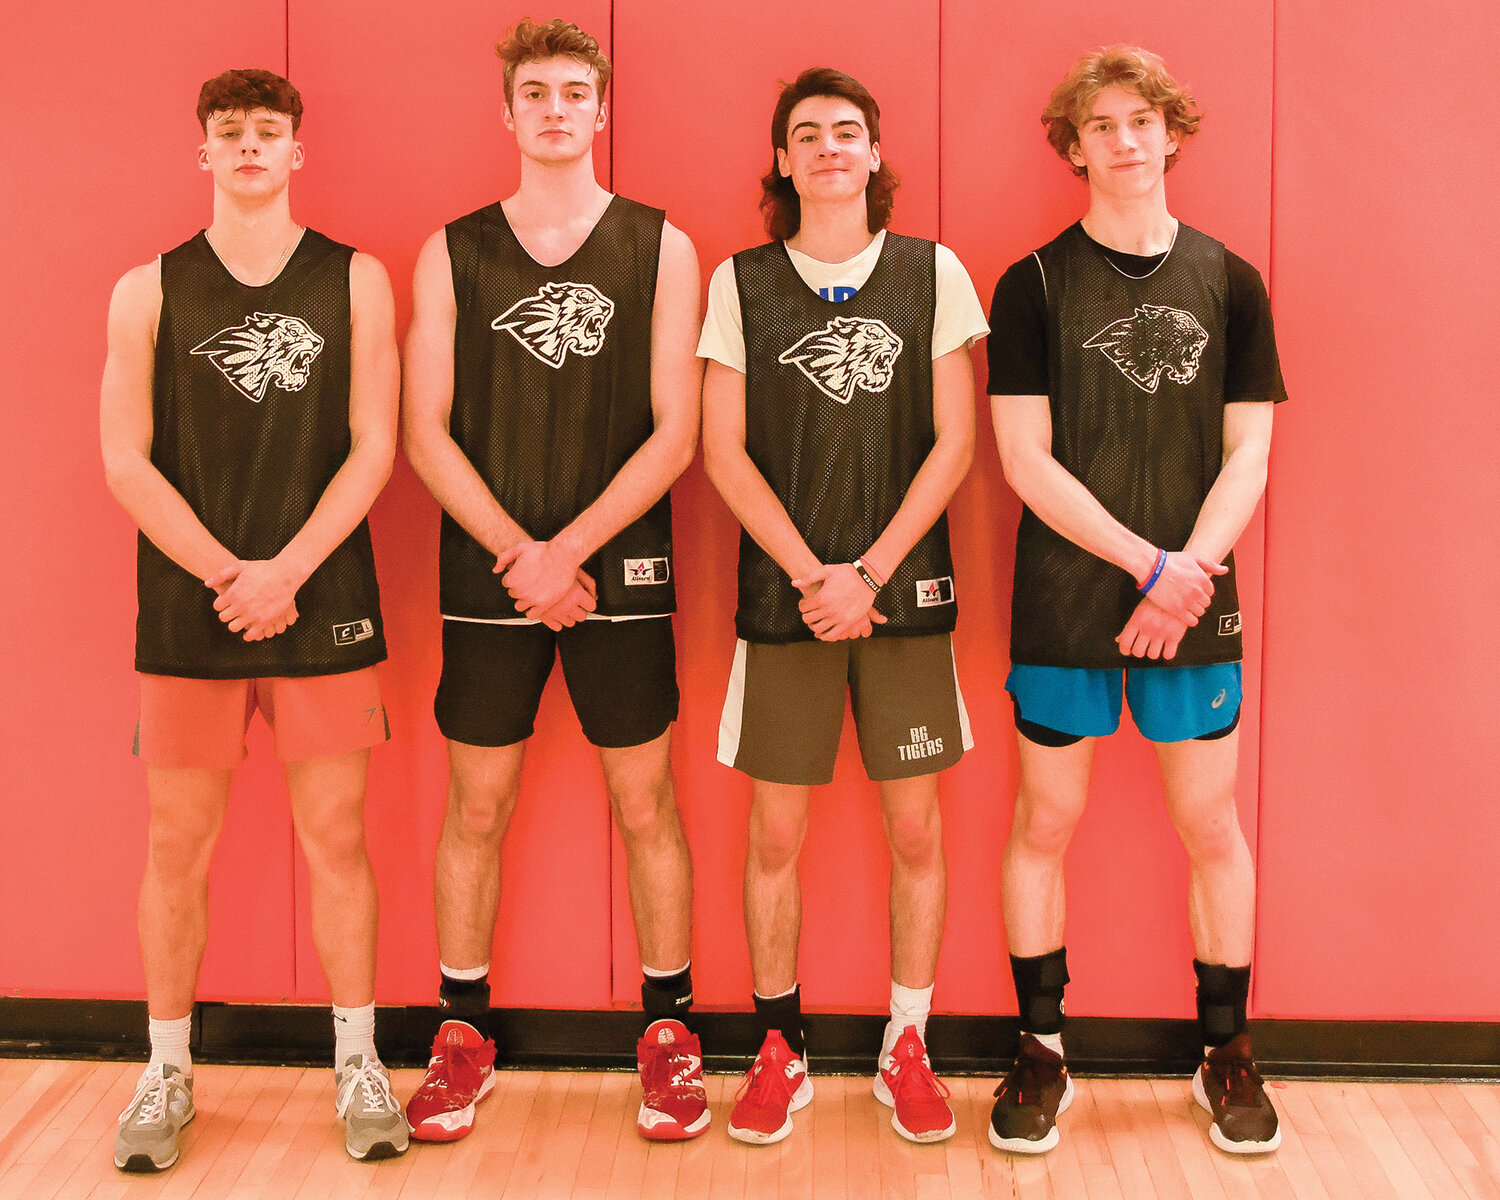 photo by cade barker
Four seniors slated for Battle Ground’s starting lineup, from left to right: Noah Currie, Austin Ralphs, Trey Spencer and Ian Ebinger. Currie, Ralphs and Spencer are returning starters.